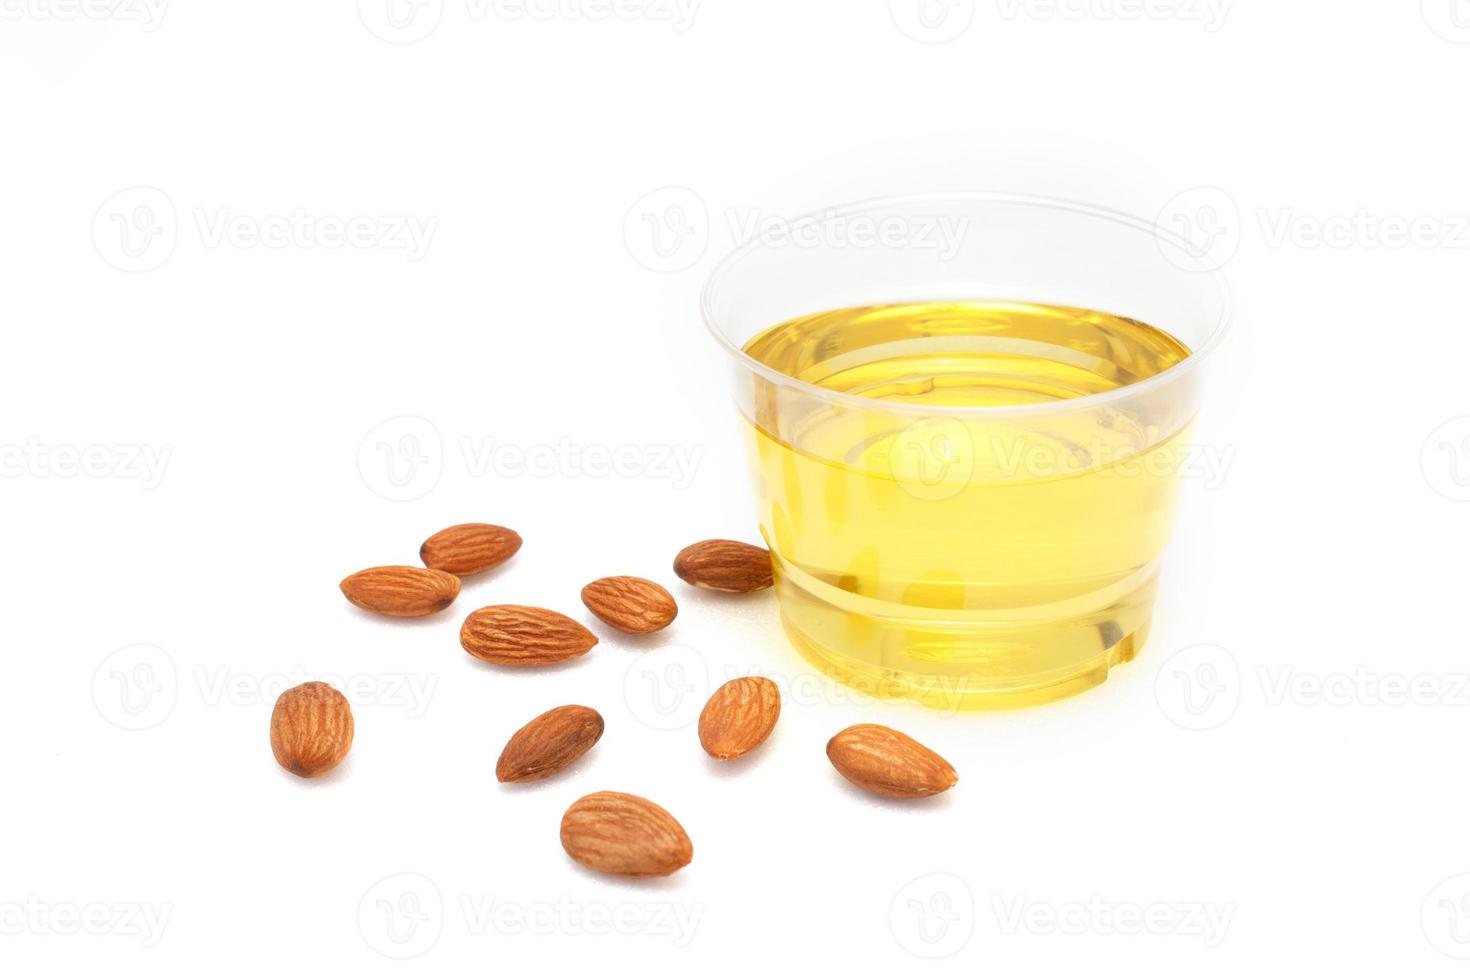 Yellow almond oil in a clear bowl with a wooden spoon next to it and several almonds on a white background. photo